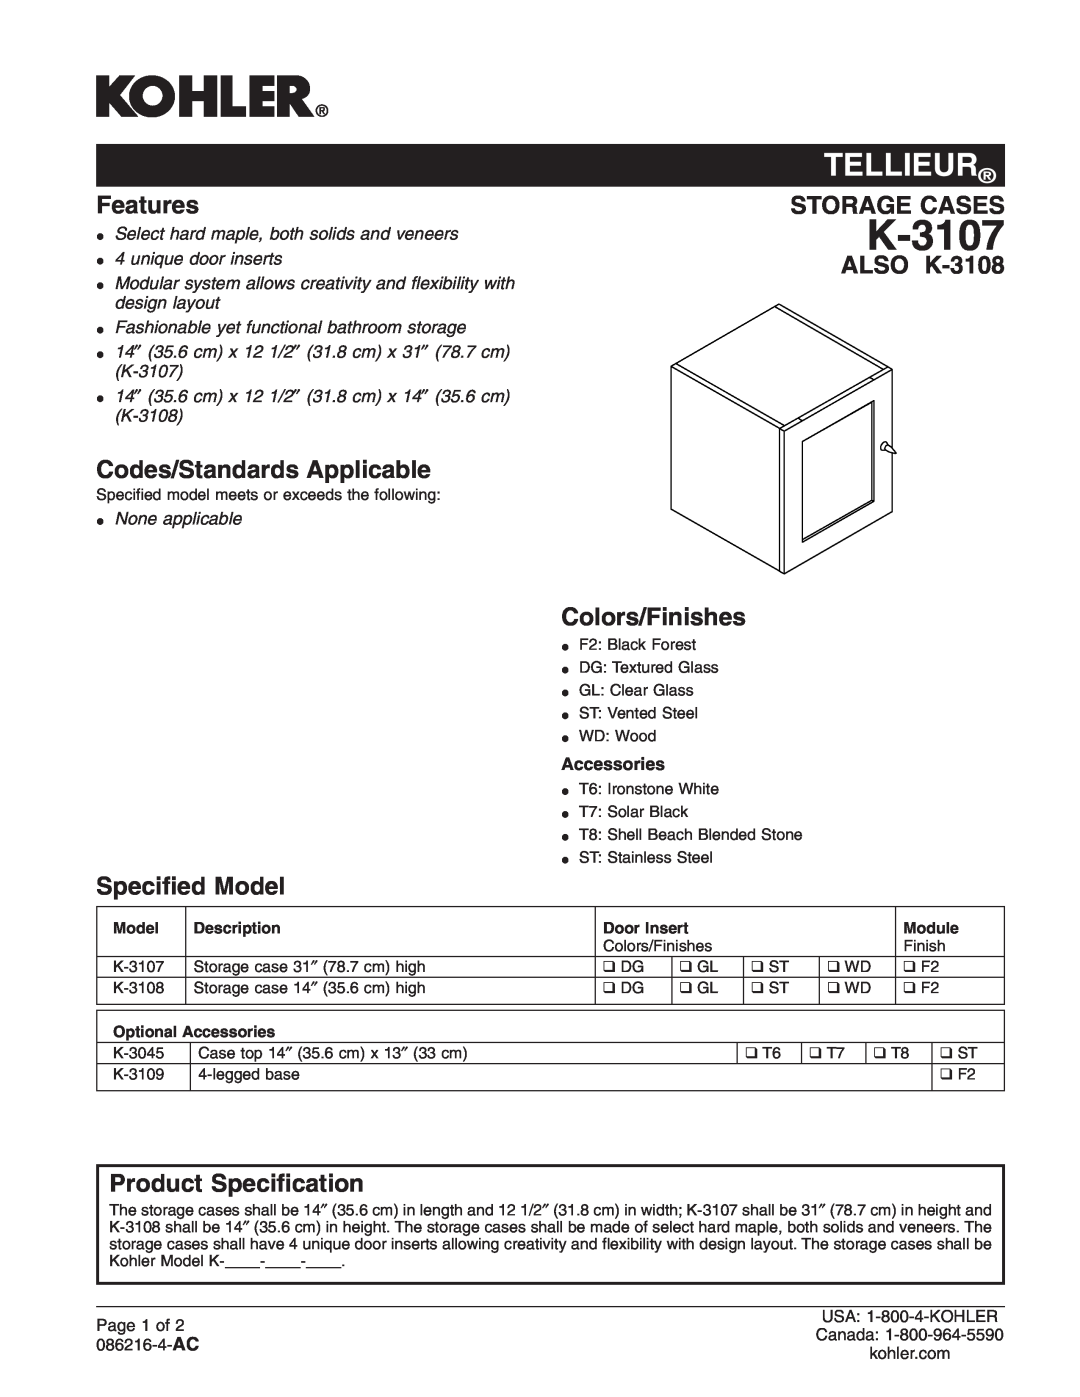 Kohler K-3107 manual Tellieur, Features, Codes/Standards Applicable, Speciﬁed Model, Storage Cases, Product Speciﬁcation 